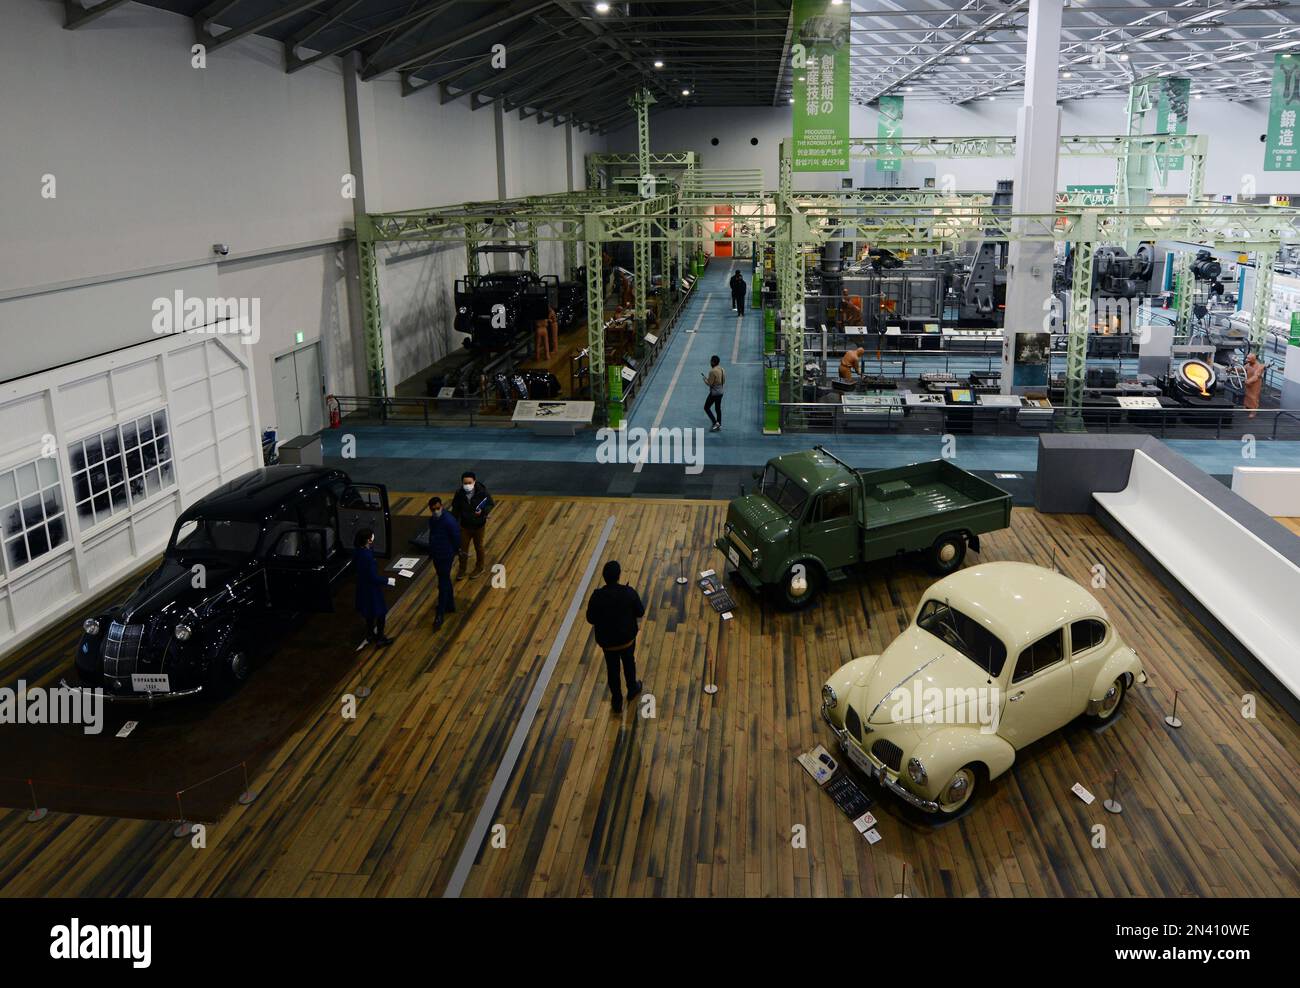 Padiglione auto nel Toyota Commemorative Museum of Industry and Technology a Nagoya, Giappone. Foto Stock